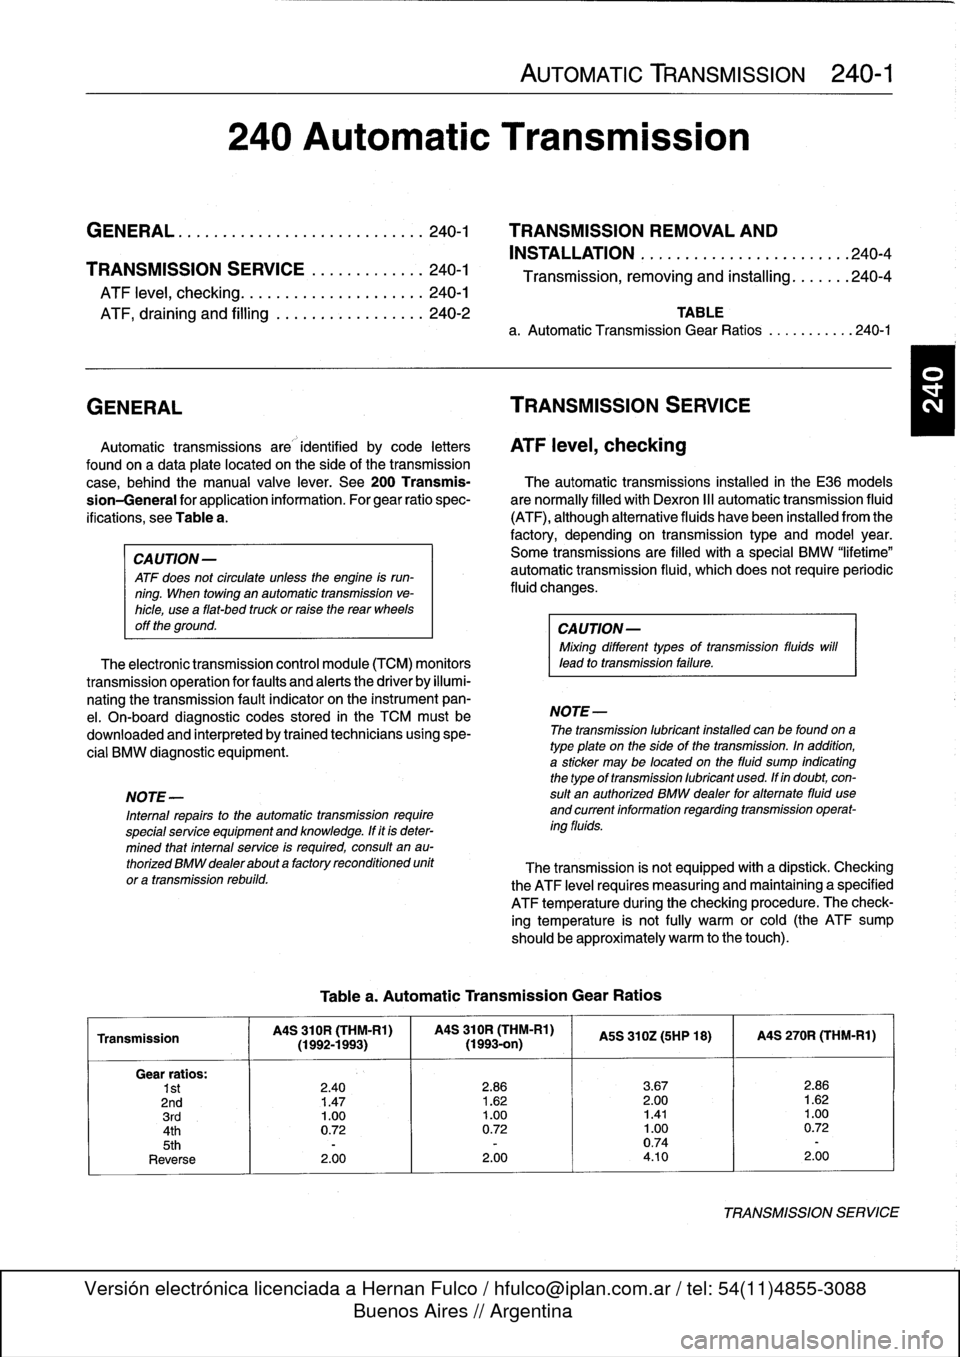 BMW 323i 1993 E36 Workshop Manual 
AUTOMATIC
TRANSMISSION

	

240-1

240
Automatic
Transmission

GENERAL
.....
.
.
.
.
.
.
.
.
.
.
.
.
.
.........
.
240-1

	

TRANSMISSION
REMOVAL
AND

INSTALLATION
..................
.
.
.
.
.240-4
TR